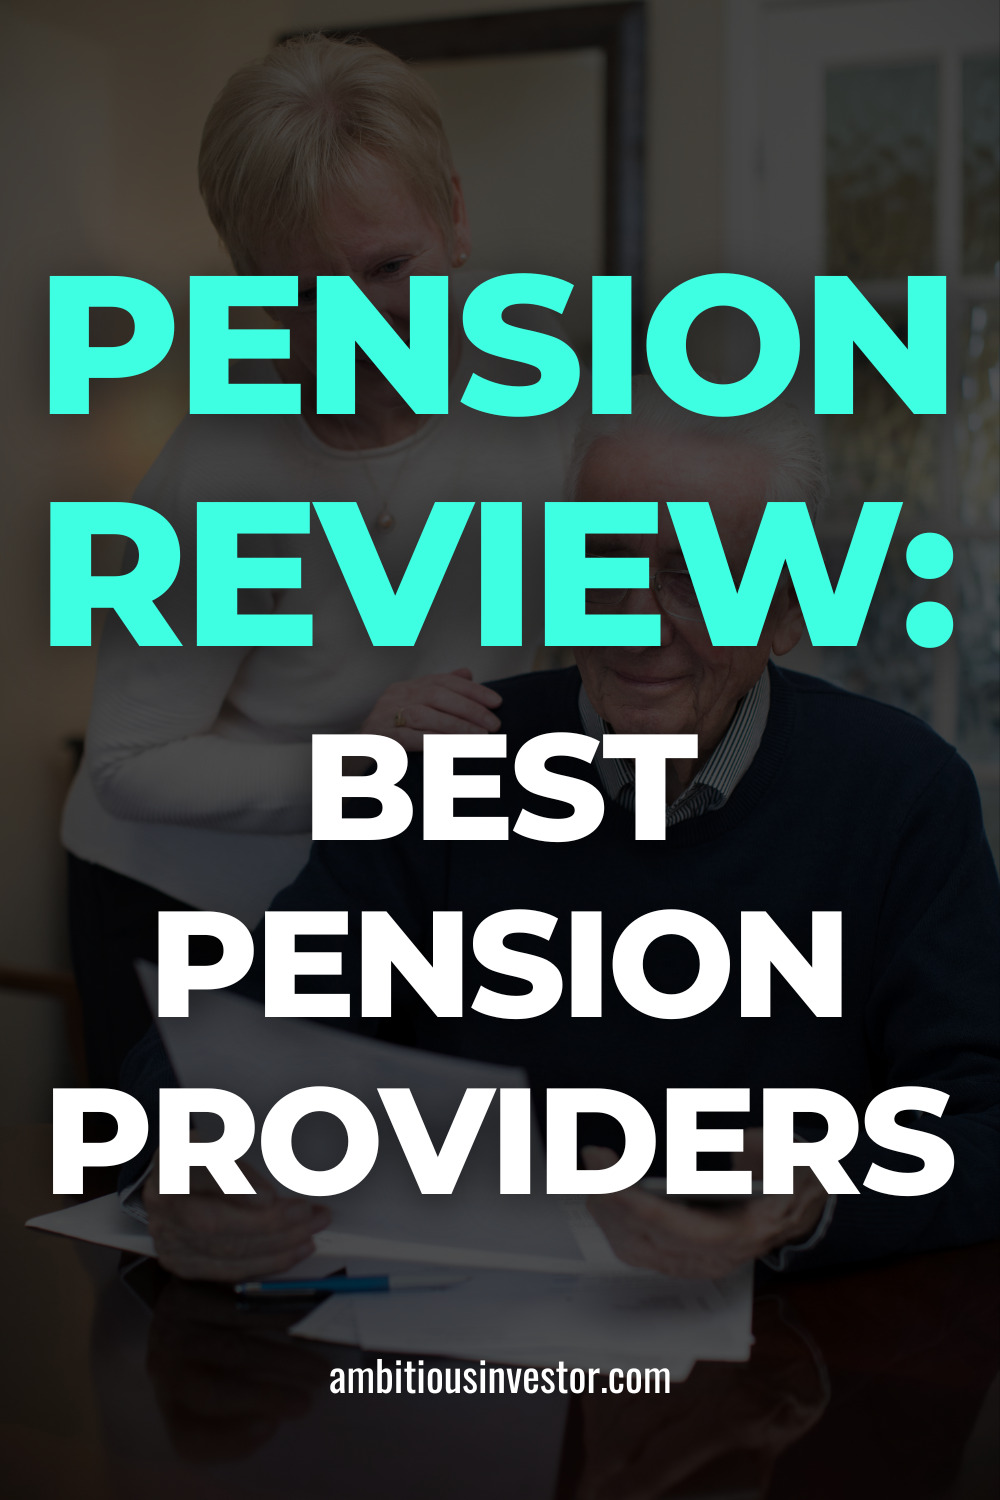 Pension Review: Best Pension Providers